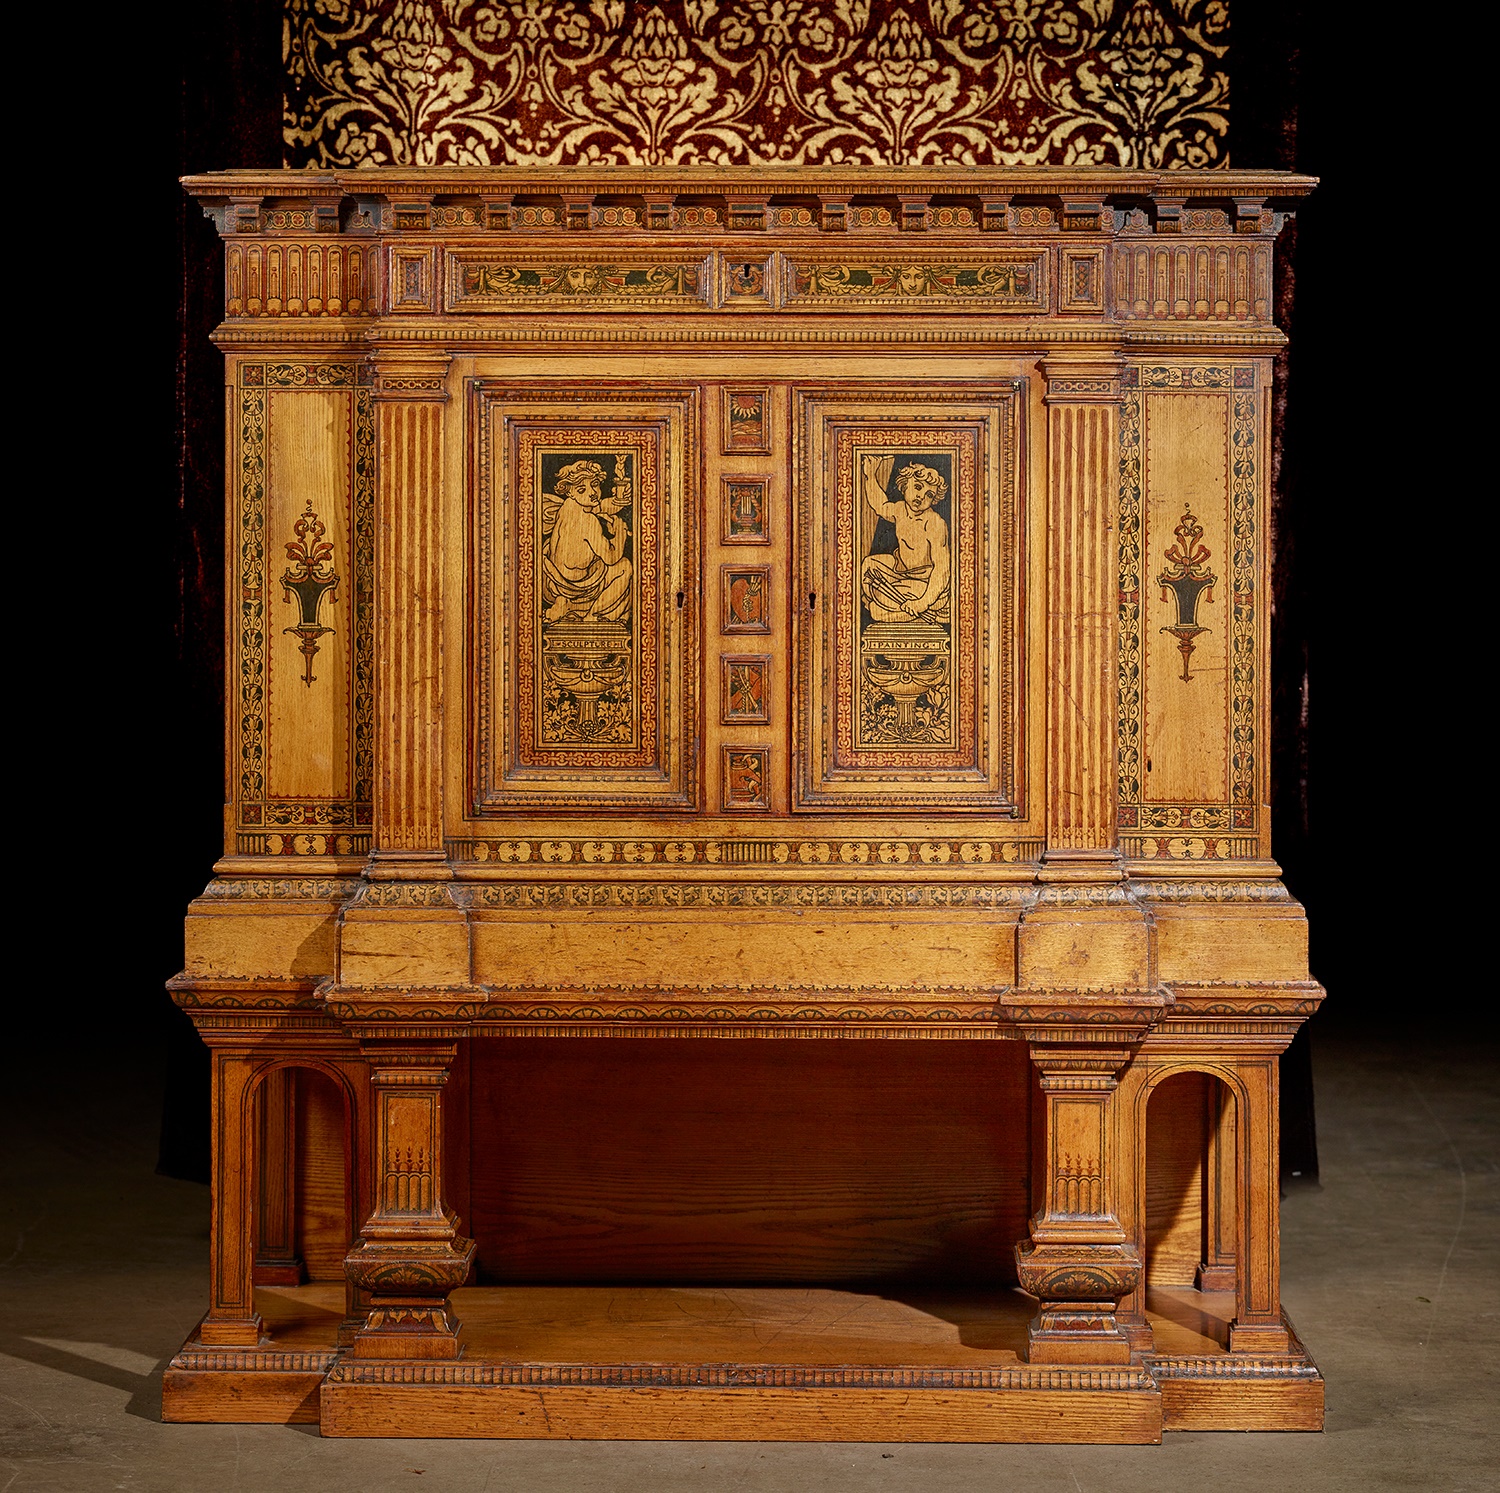 MANNER OF GODFREY SYKES AND JAMES GAMBLE RENAISSANCE REVIVAL CABINET-ON-STAND, CIRCA 1860